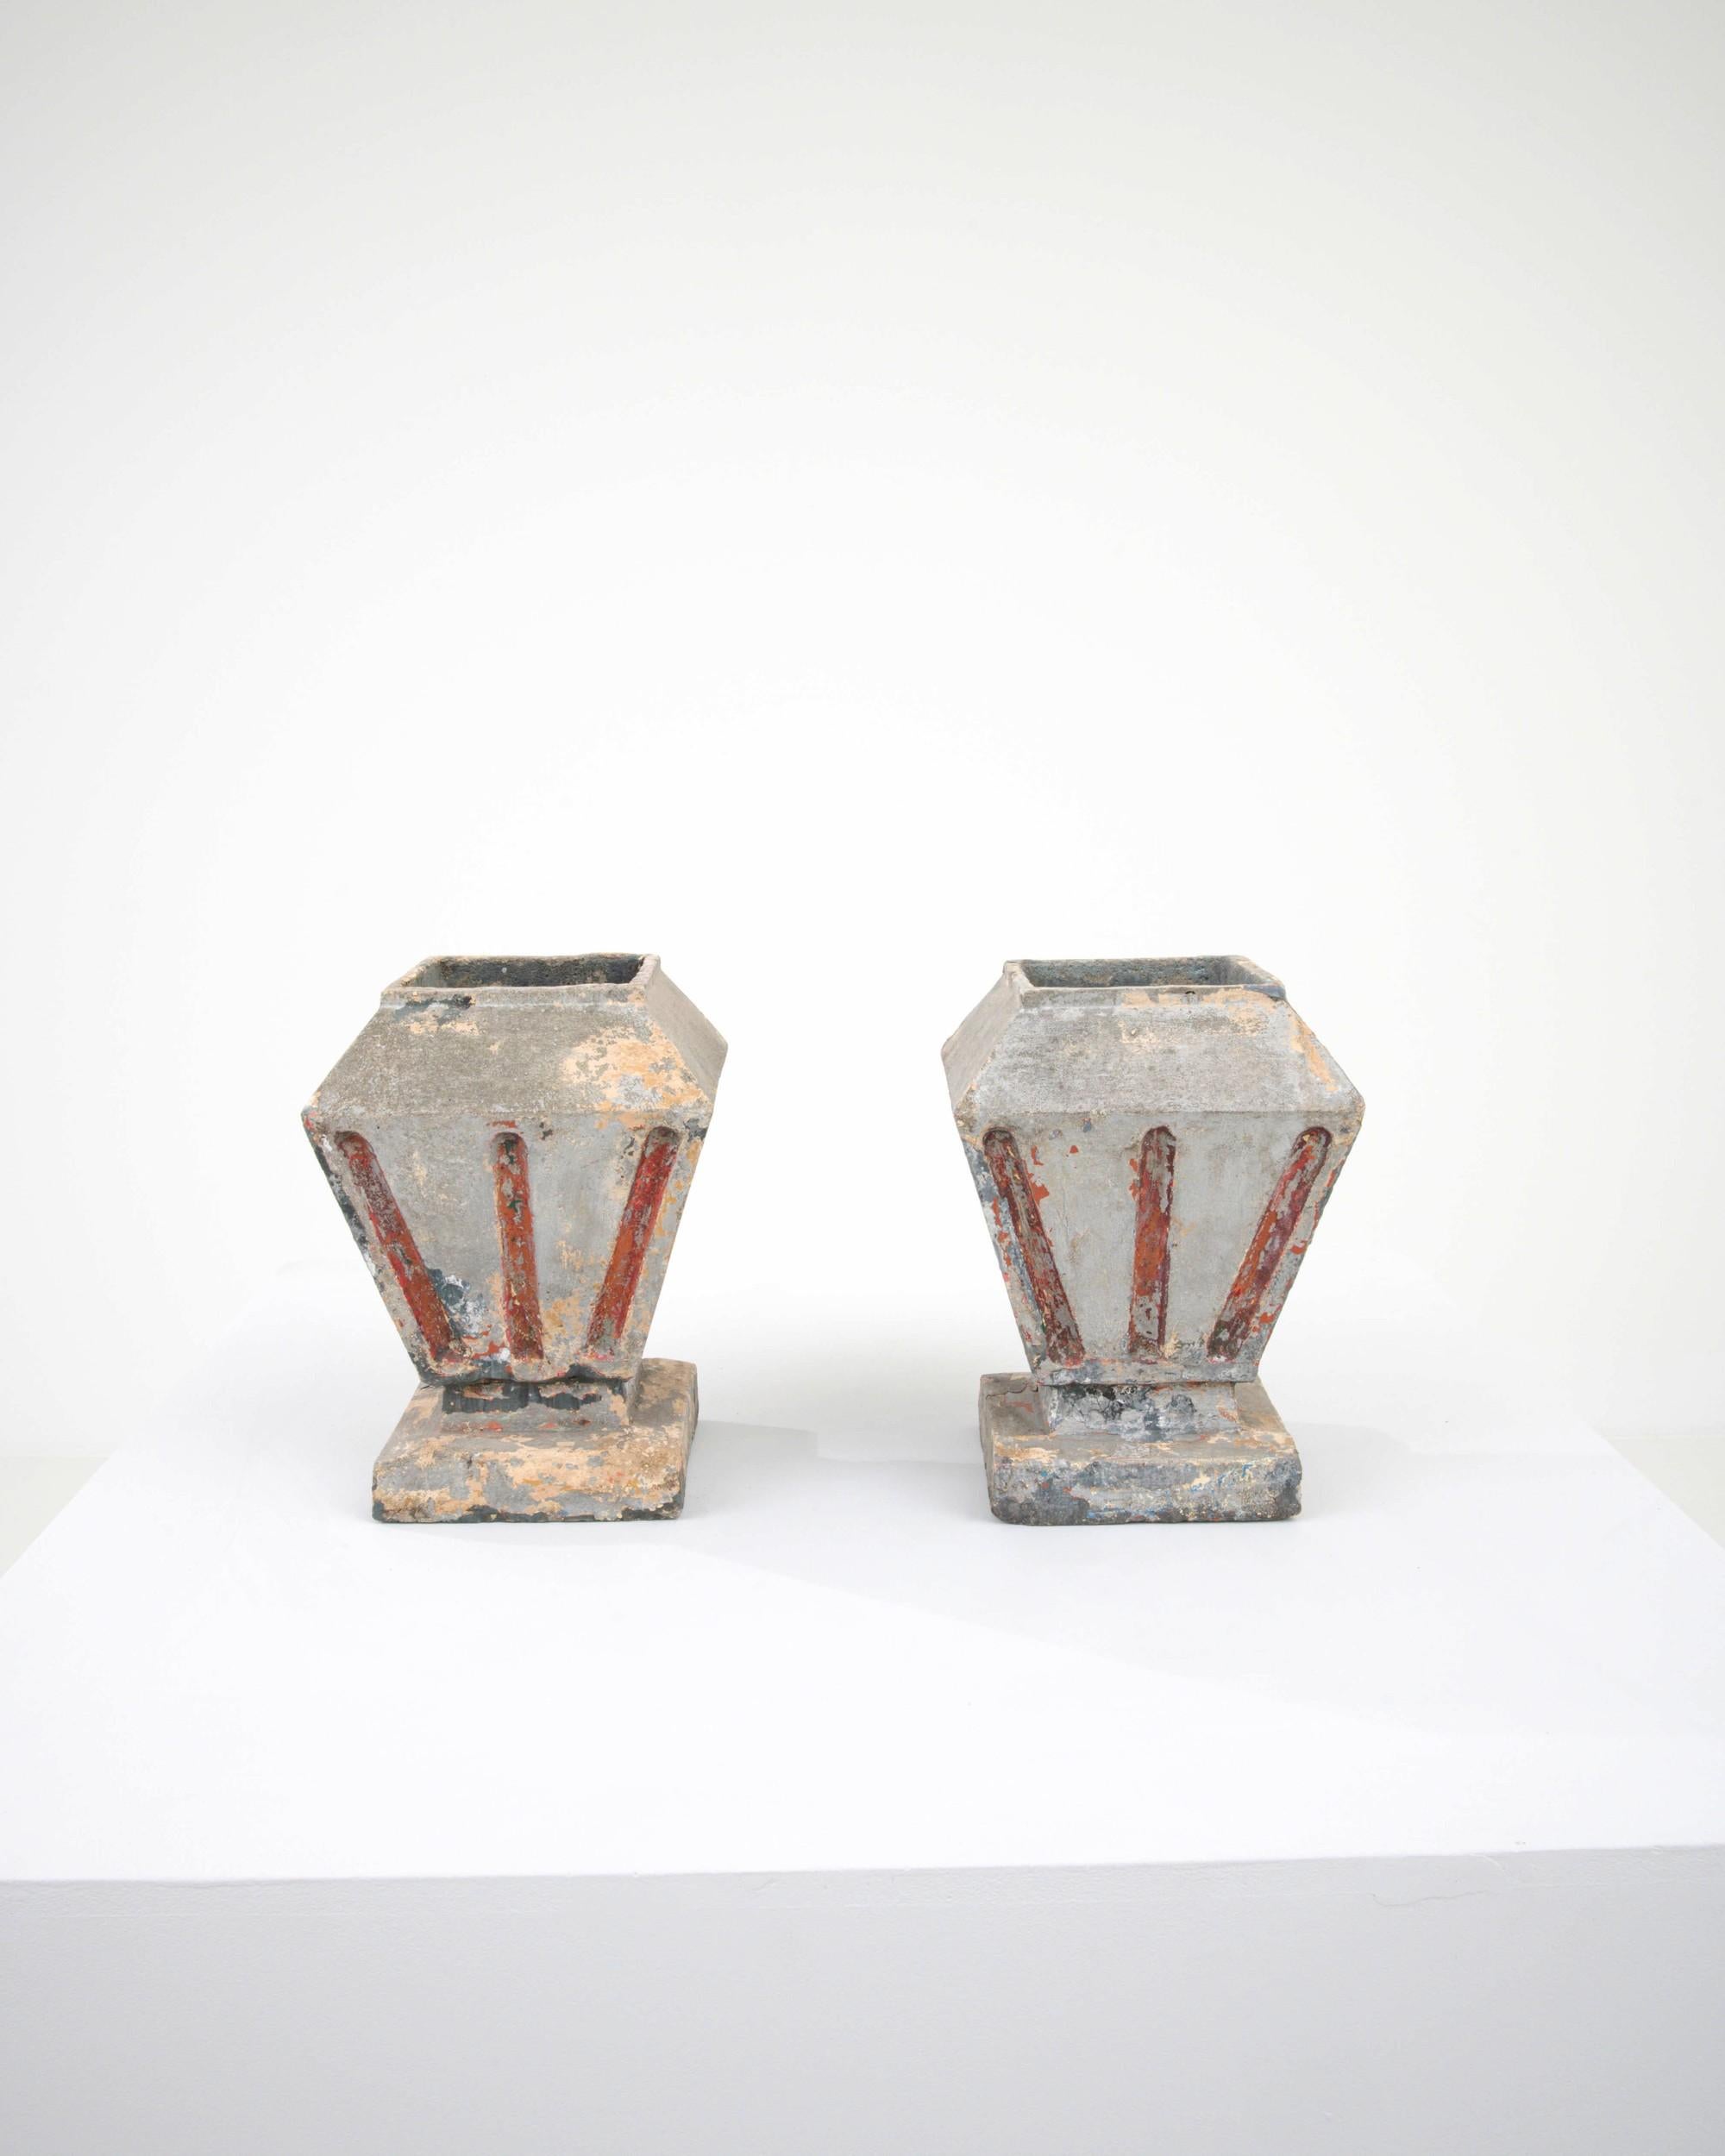 Weathered by exposure outdoors, this pair of antique urns, created in 20th century France, are brimming with unique character. A sharp geometry, artfully shaped, creates an eye-pleasing and thoughtfully provoking form. Red stripes frame the tapered